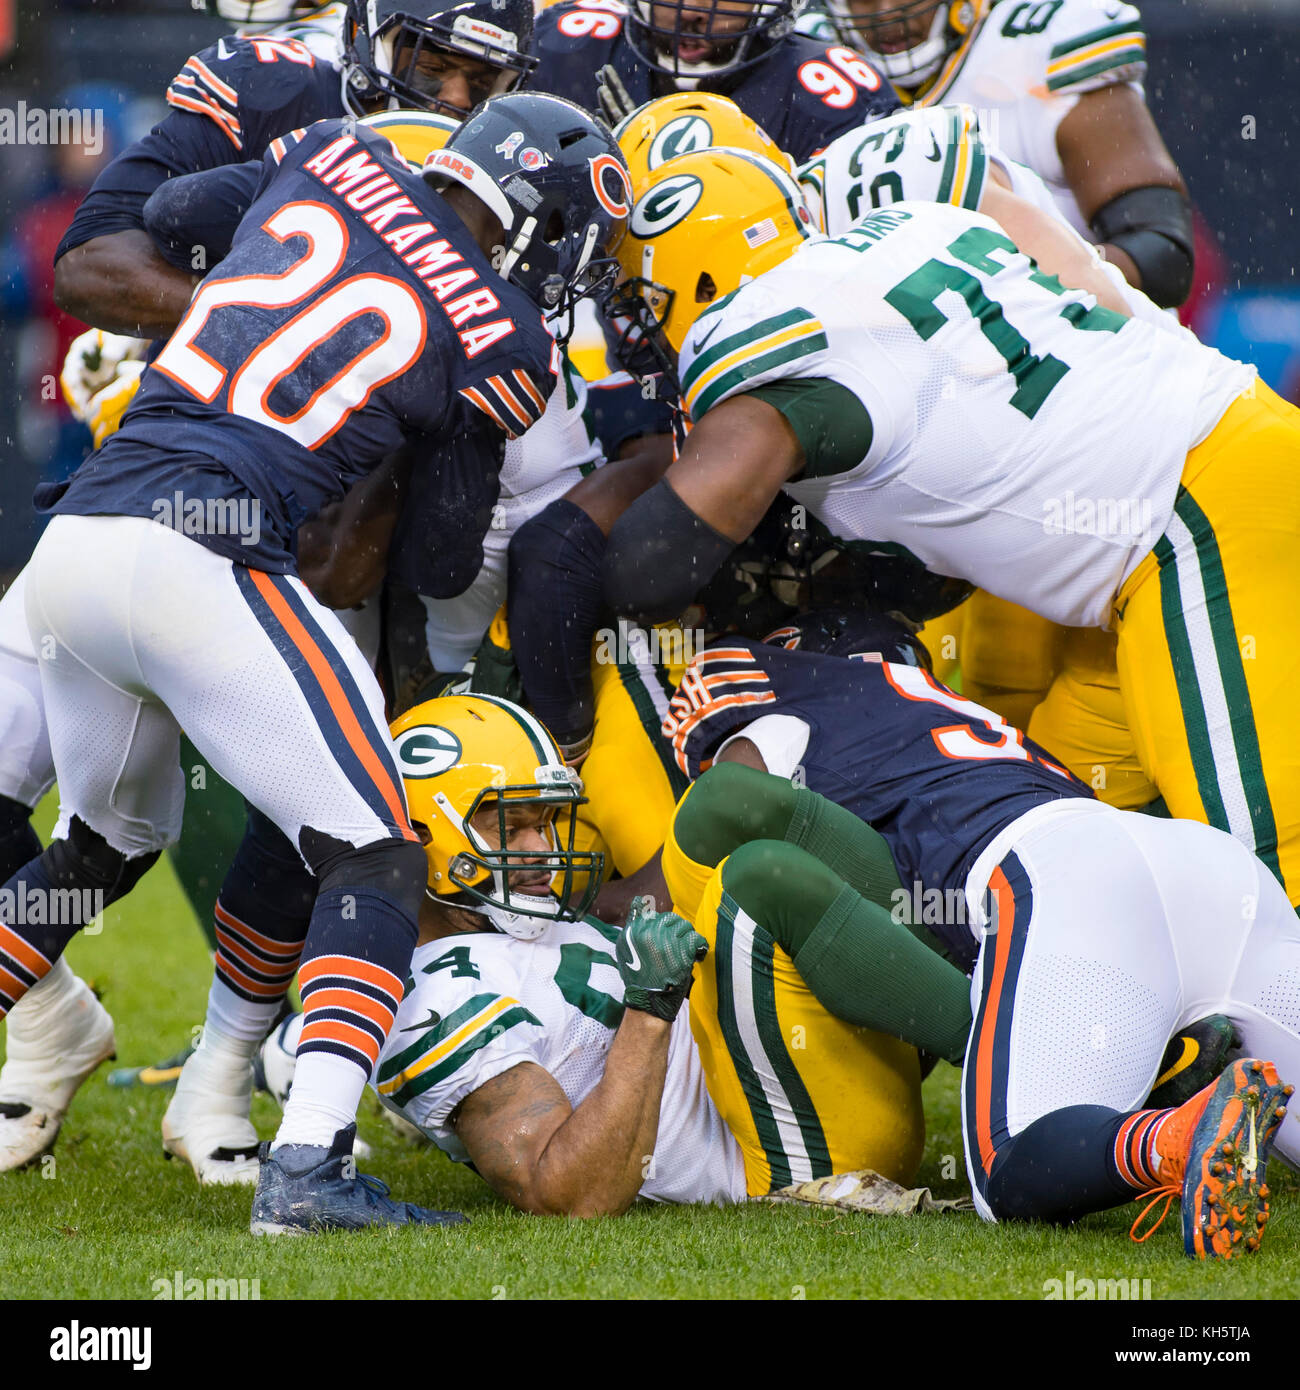 Chicago, Illinois, USA. 12th Nov, 2017. - Packers #84 Lance Kendricks finds himself at the bottom of the pile during the NFL Game between the Green Bay Packers and Chicago Bears at Soldier Field in Chicago, IL. Photographer: Mike Wulf Credit: csm/Alamy Live News Stock Photo